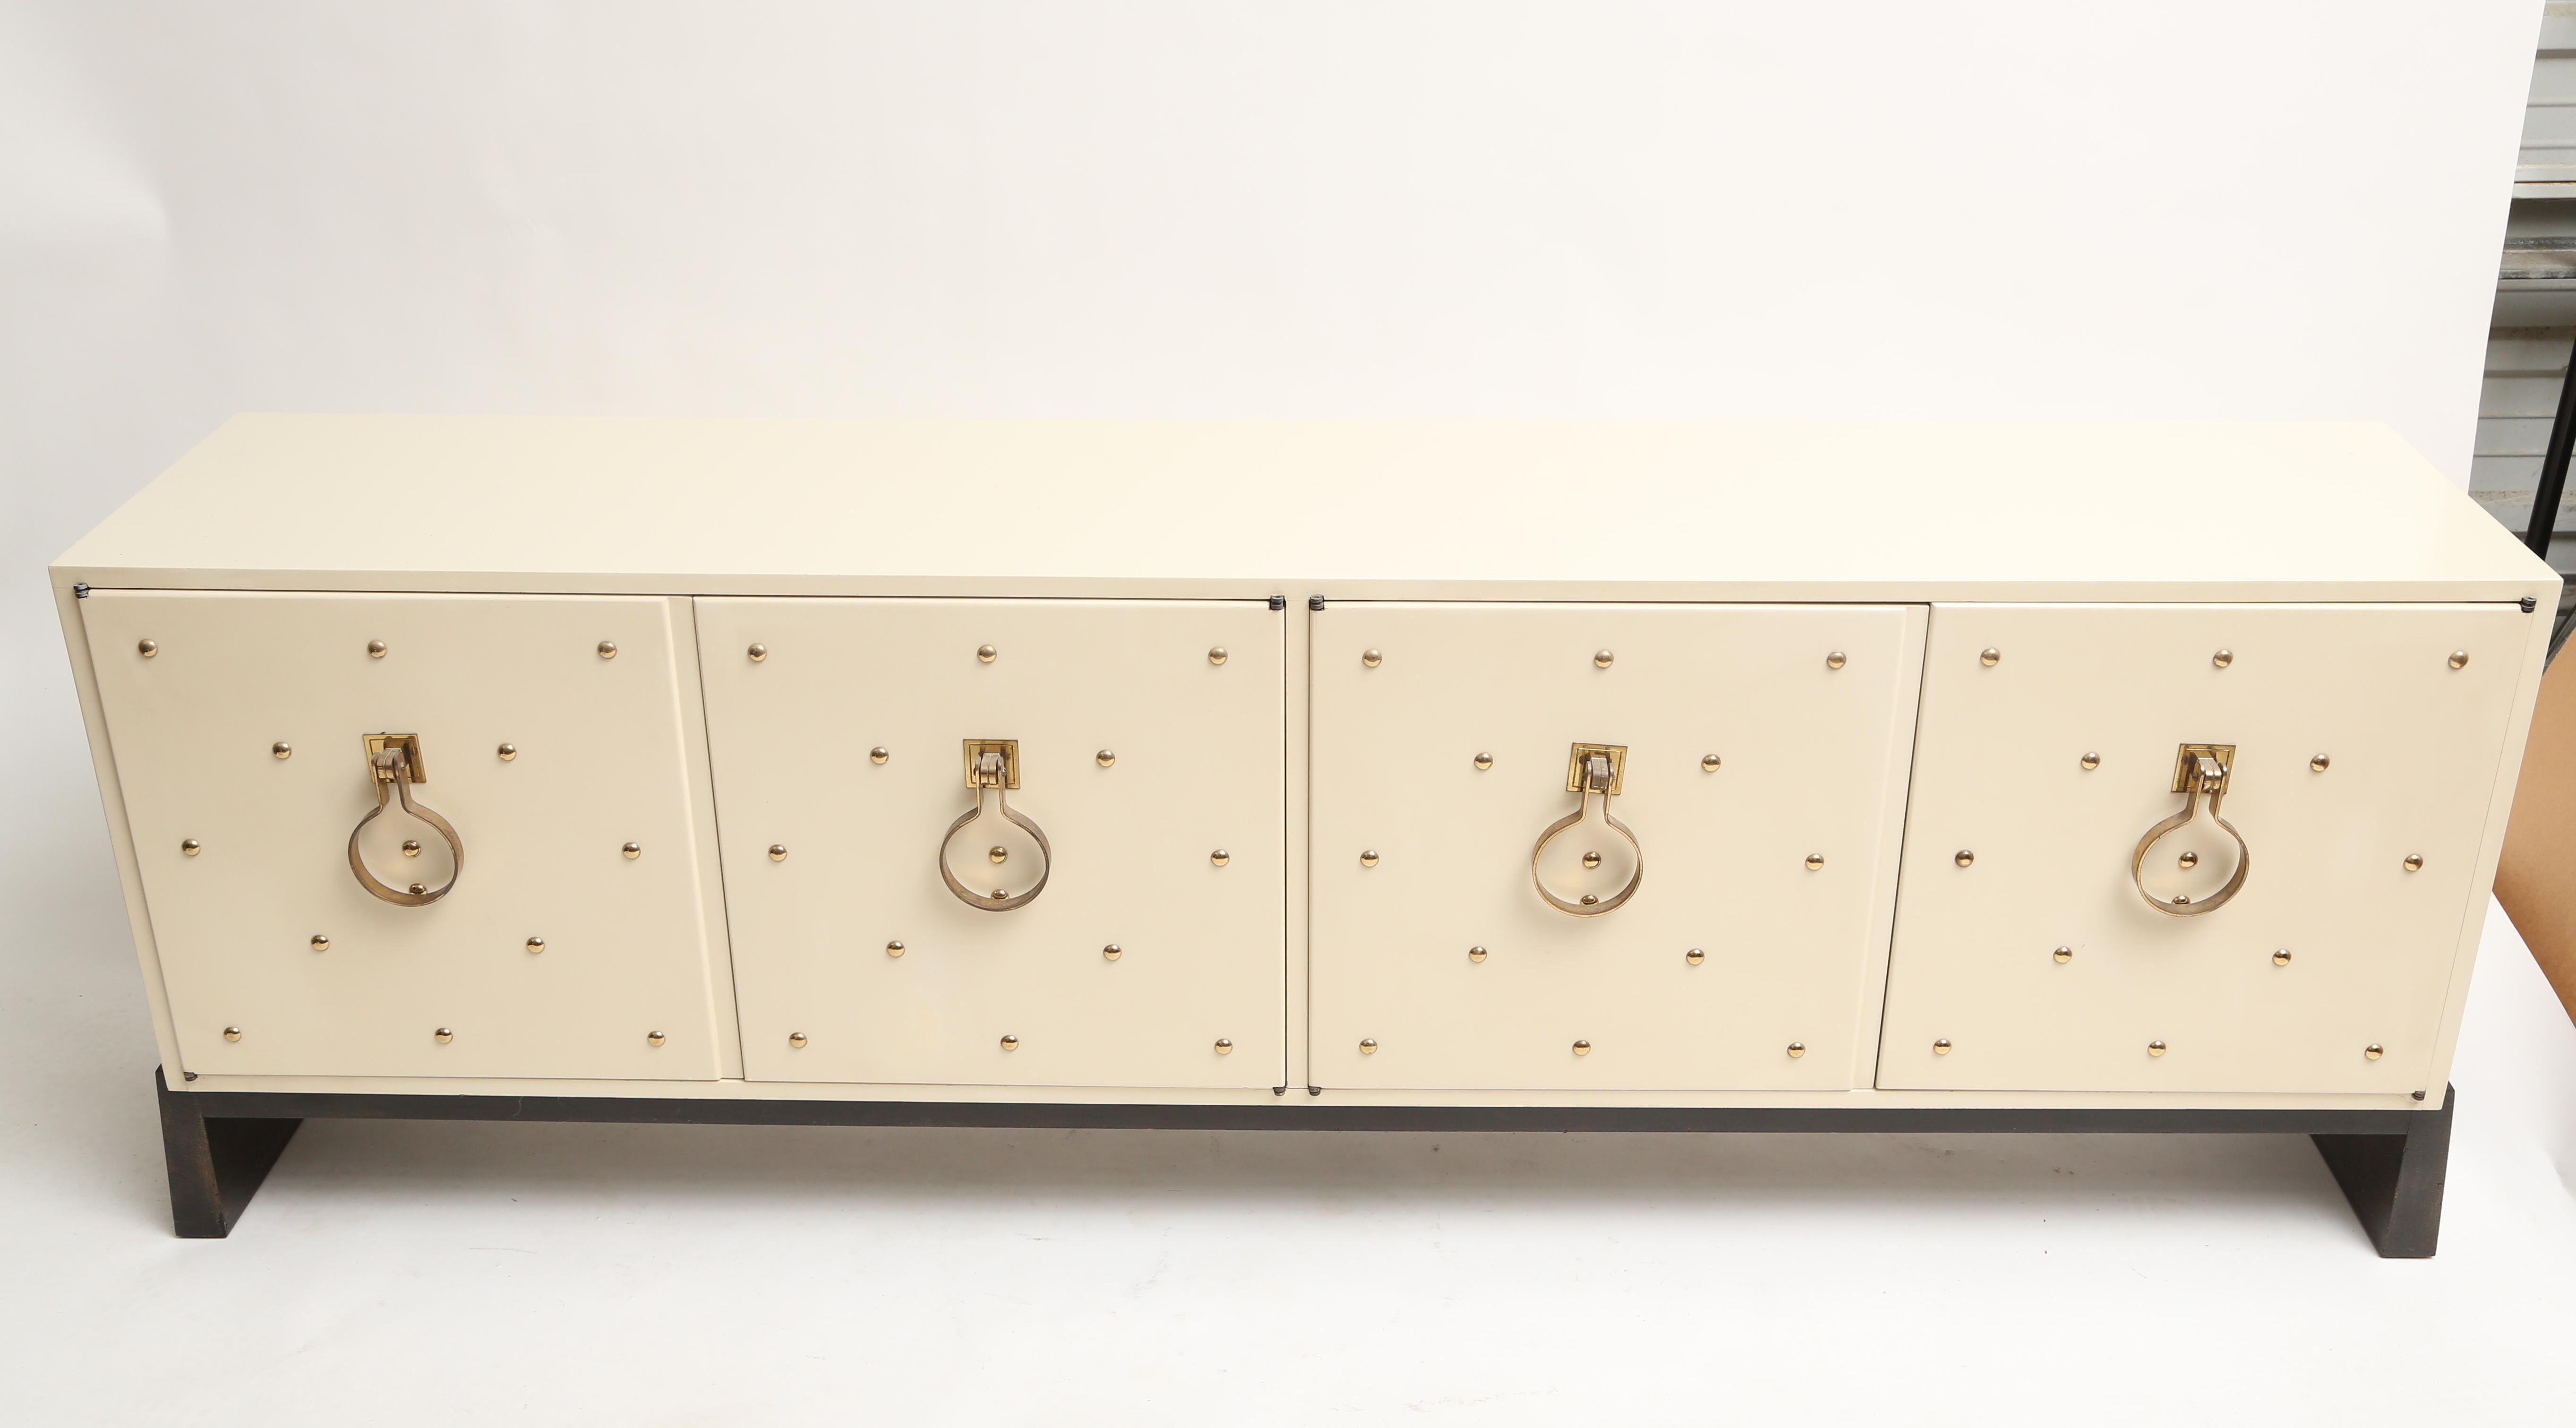 The studded cabinets are one of Tommi Parzinger's signature designs.
This example is in the original surface.
Stamped with the Parzinger mark.
 